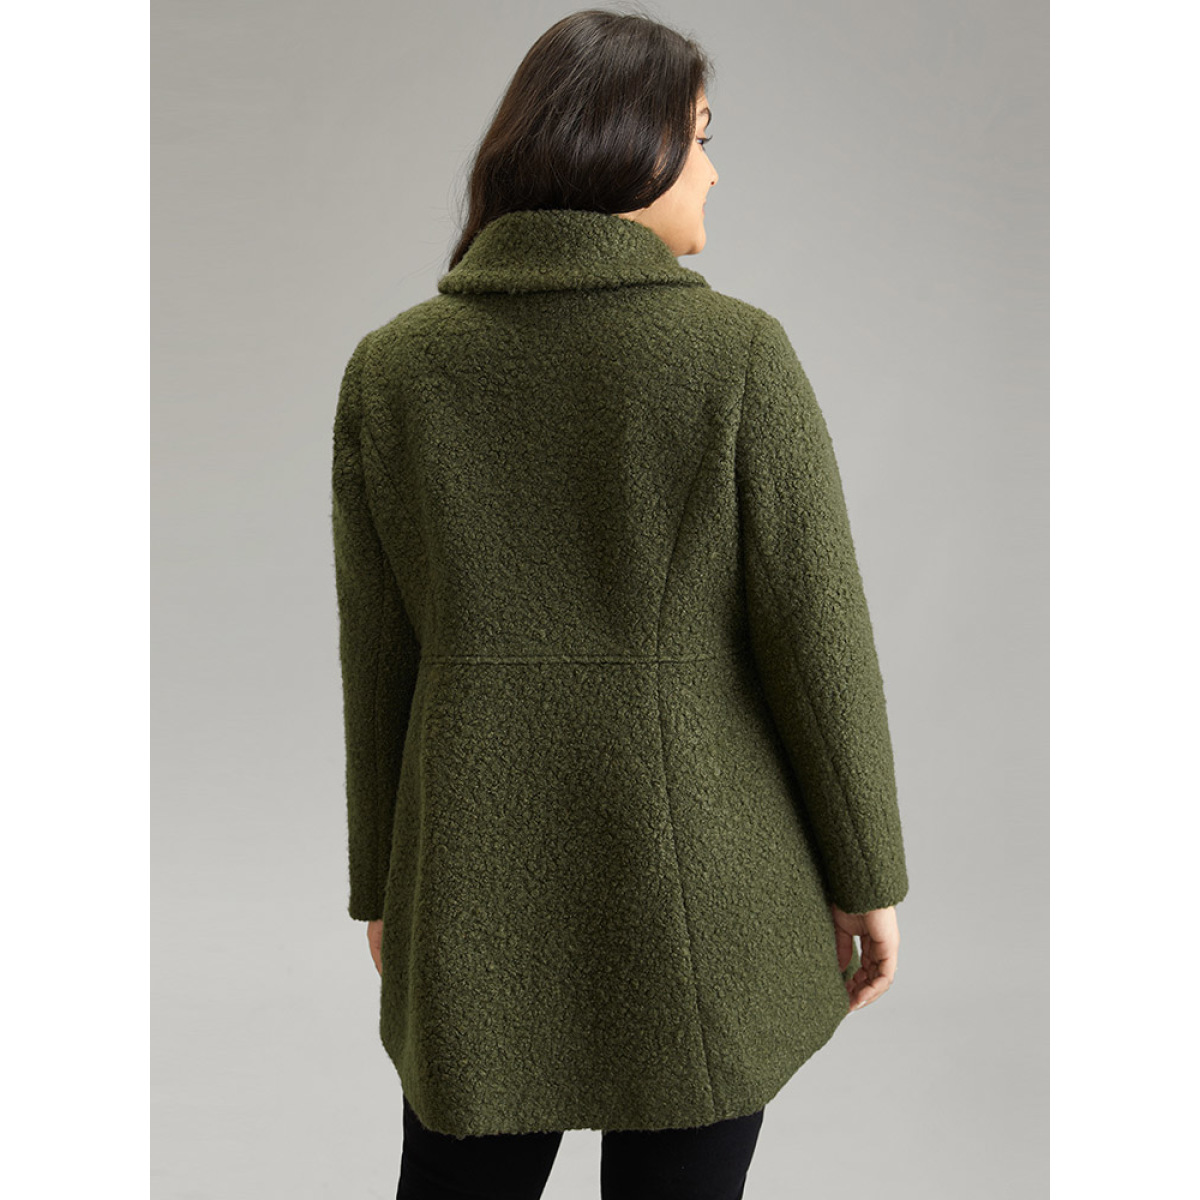 

Plus Size Fluffy Asymmetrical Neck Double Breasted Coat Women ArmyGreen Casual Lined Ladies Dailywear Winter Coats BloomChic